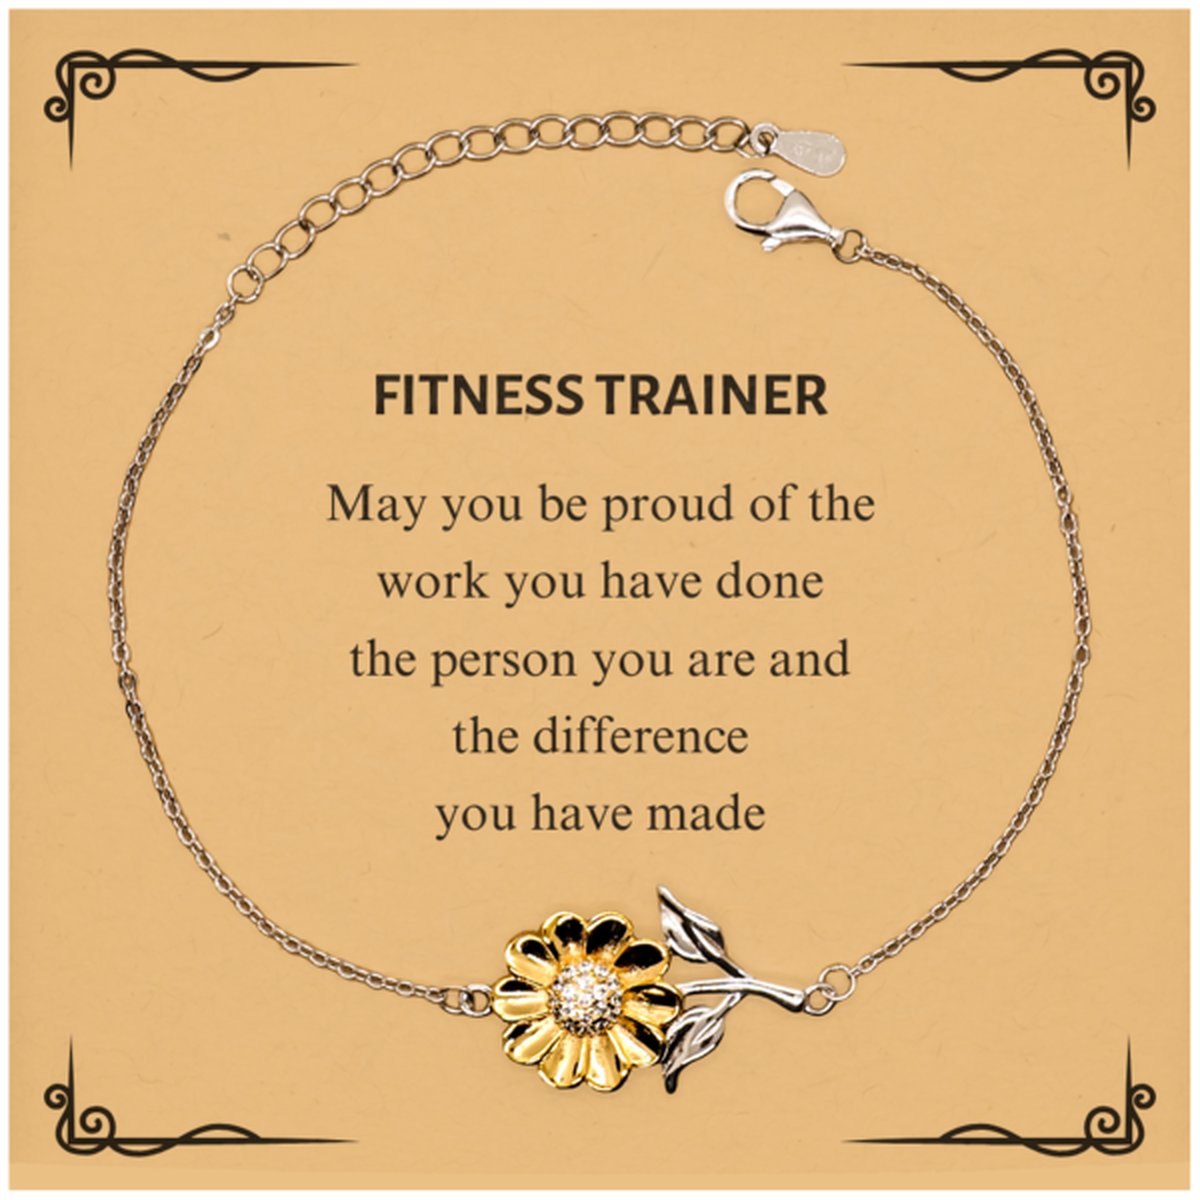 Fitness Trainer May you be proud of the work you have done, Retirement Fitness Trainer Sunflower Bracelet for Colleague Appreciation Gifts Amazing for Fitness Trainer